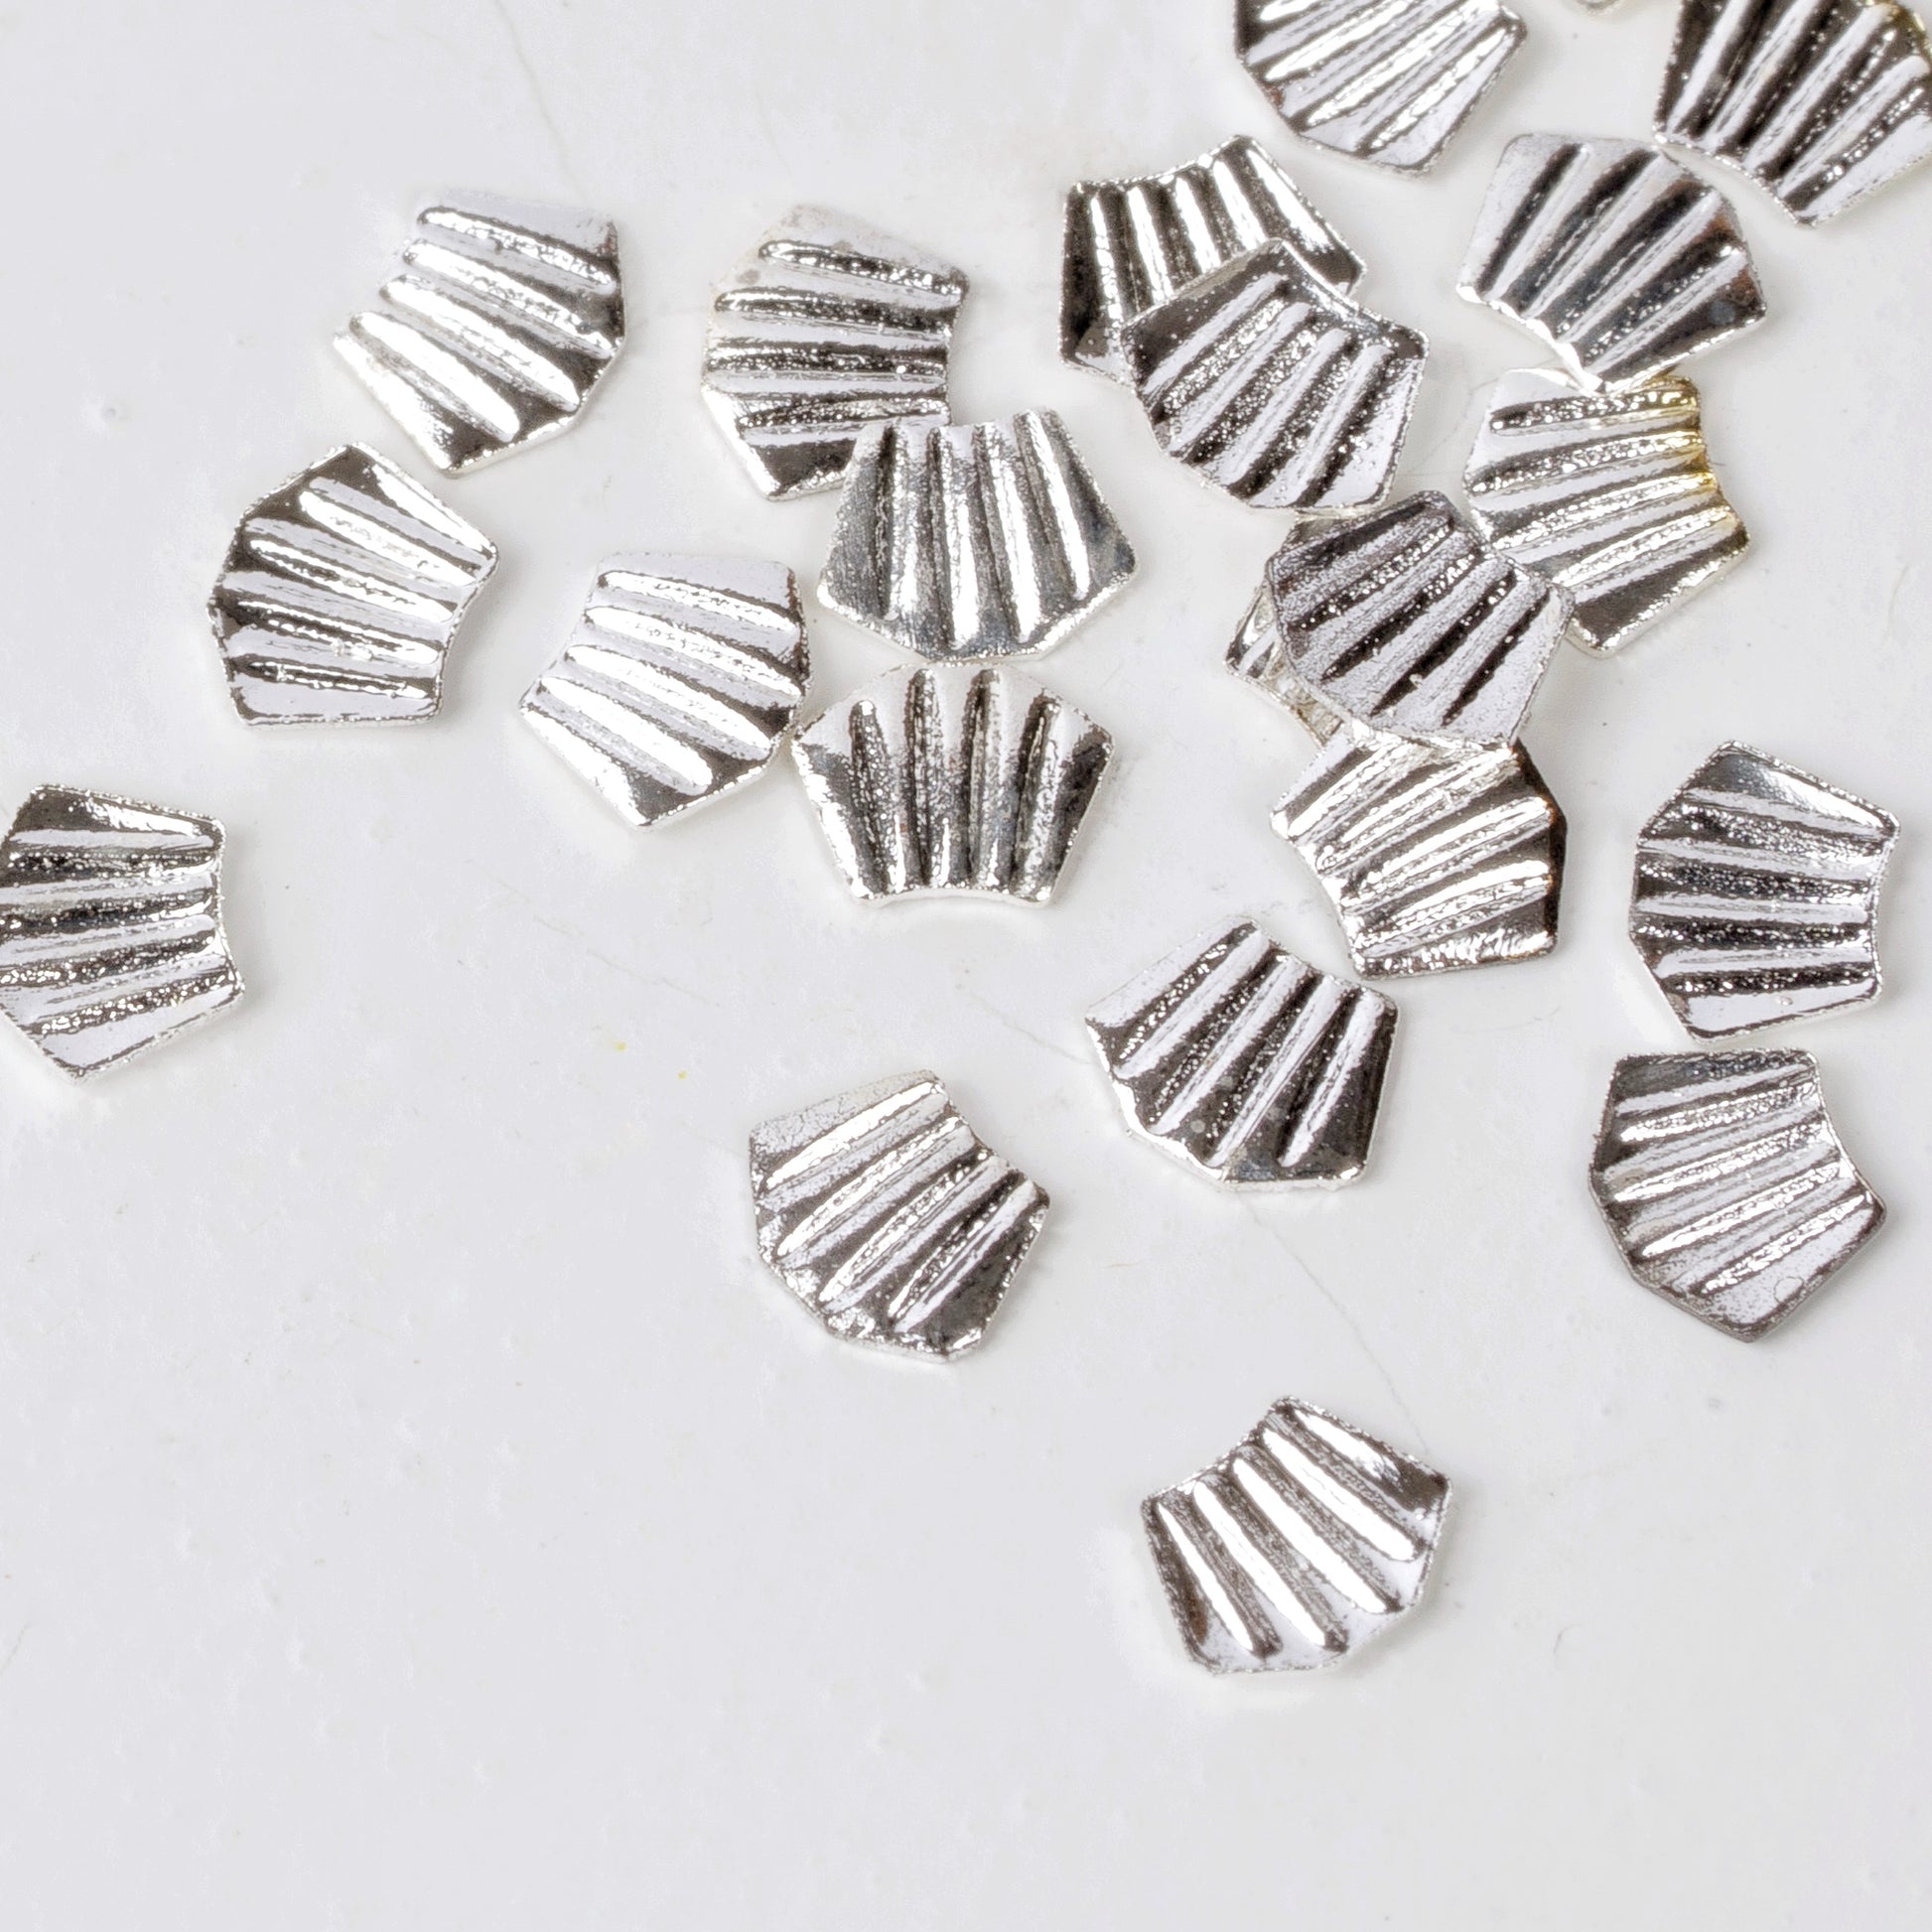 Silver nail charms scattered on white background.